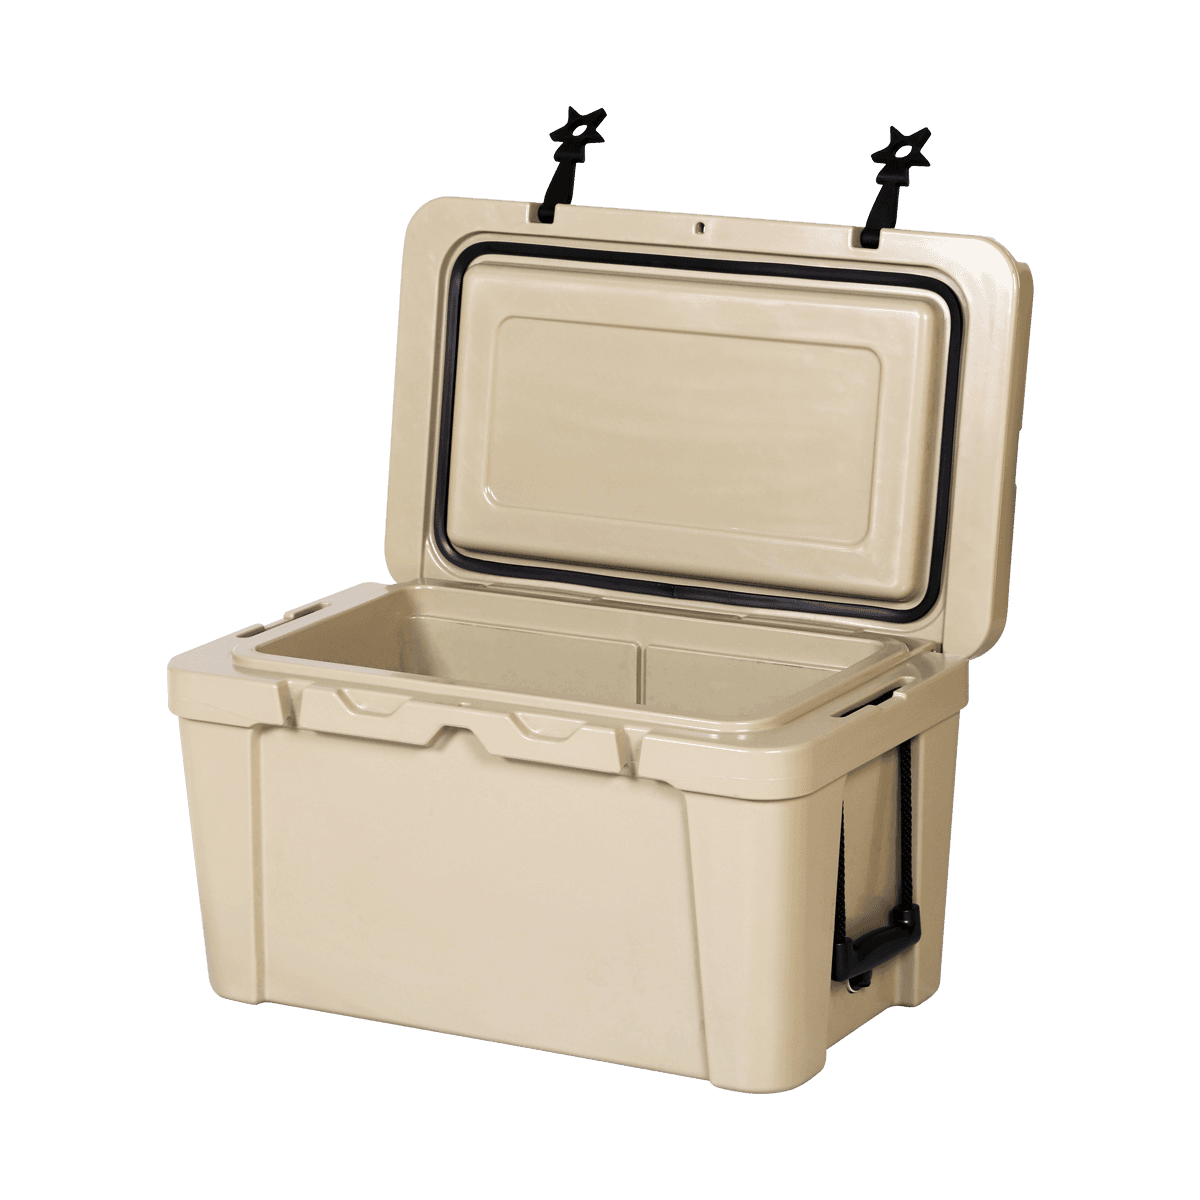 K-25L Portable Cooler Outdoor Leisure Use Cooler Box